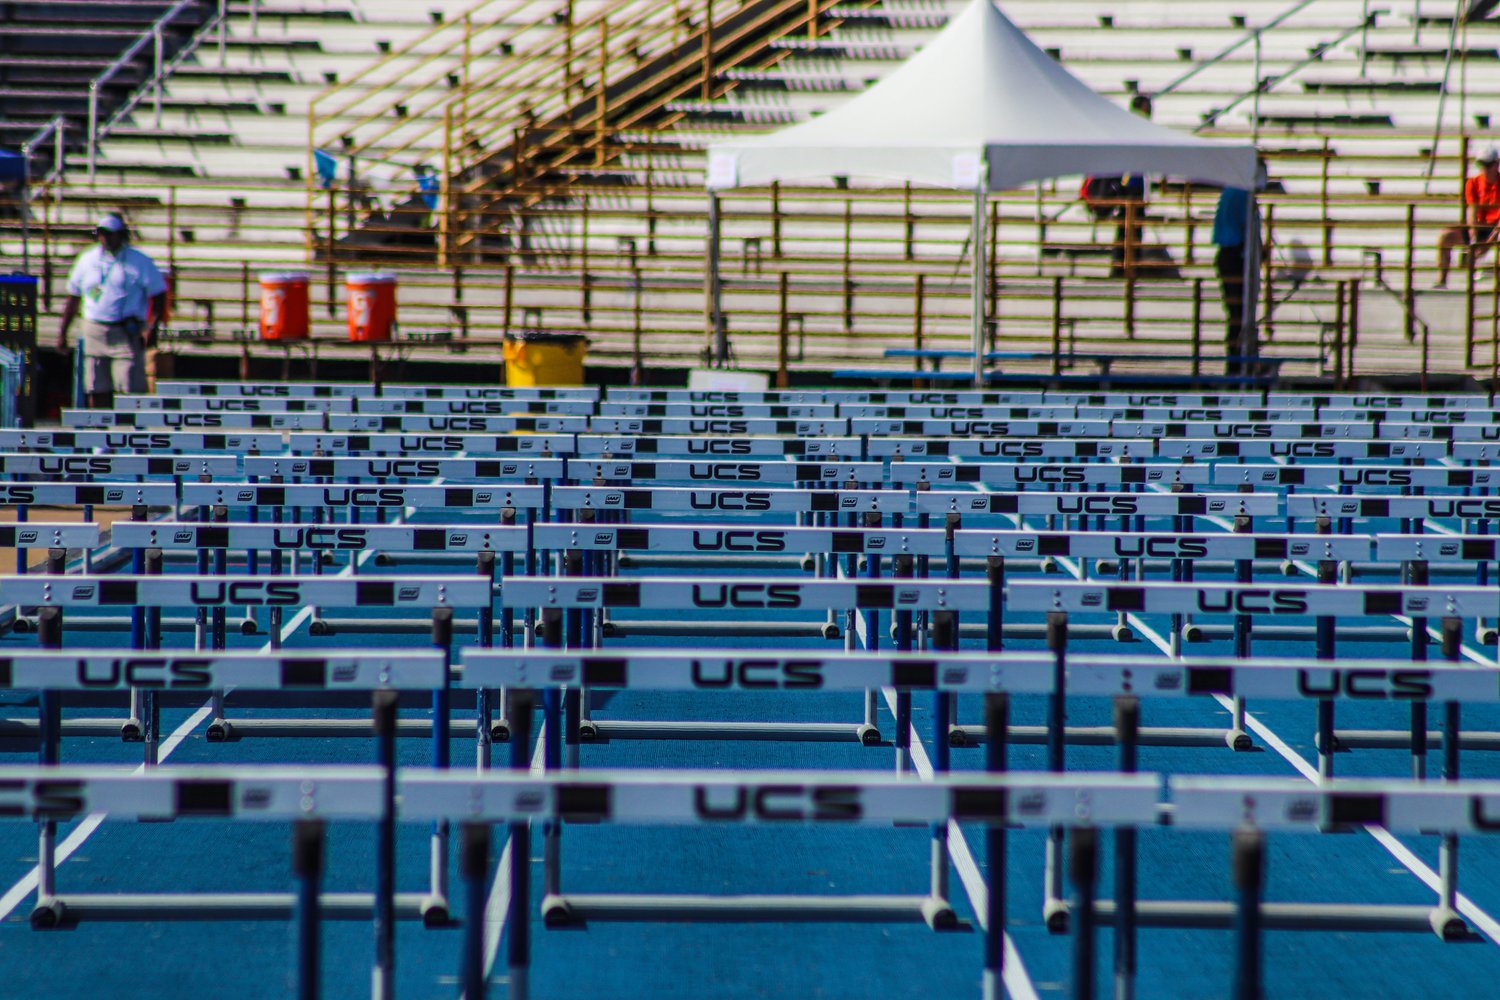 A view of the hurdles at Irwin Belk Track at North Carolina A&T State University in Greensboro, the host of the 2021 NCHSAA Track & Field State Championships this past weekend.